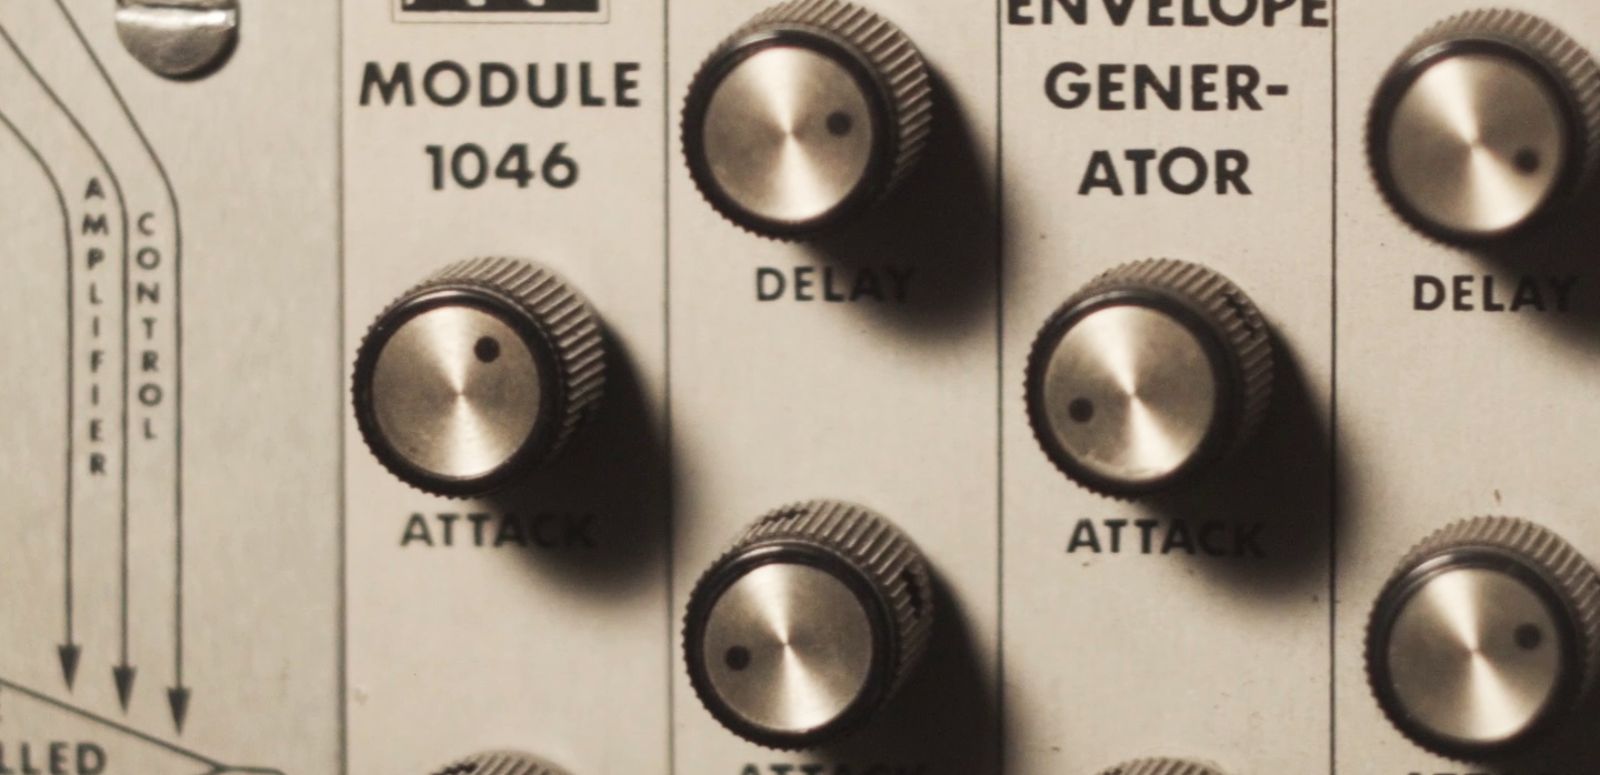 Rotary knobs of an ARP synthesizer